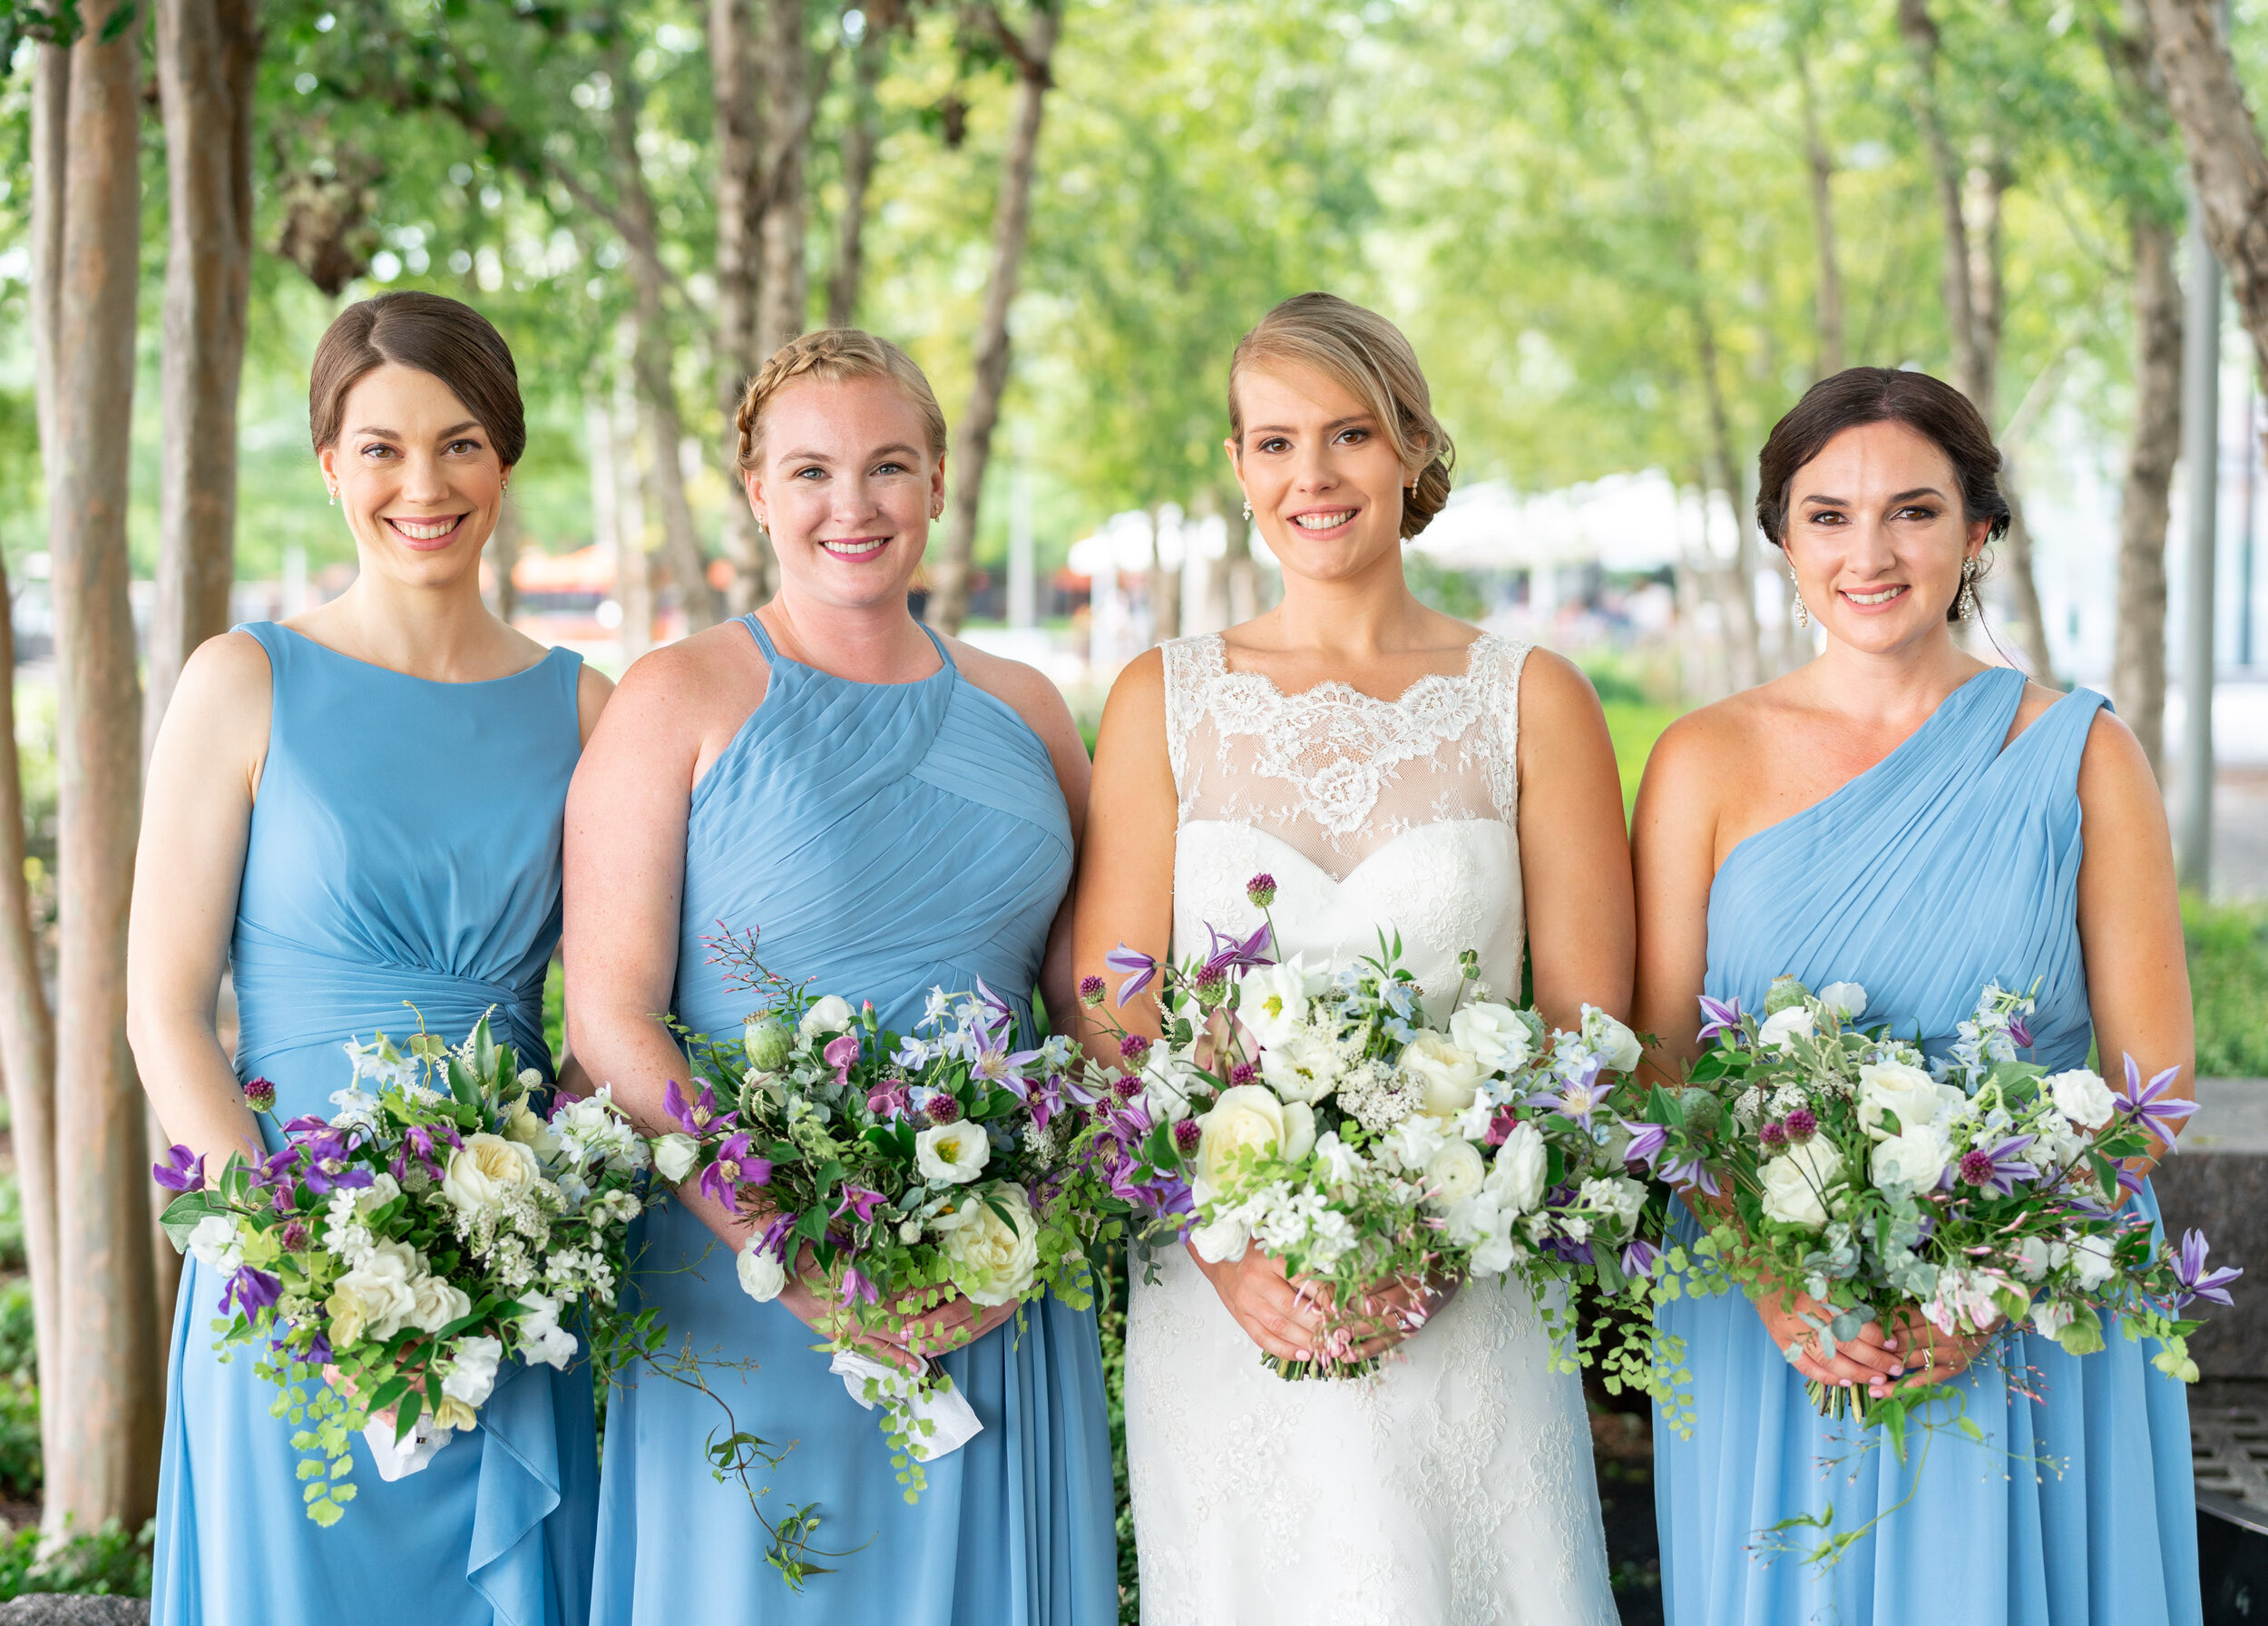 Bride and bridesmaids in blue Azazie gowns